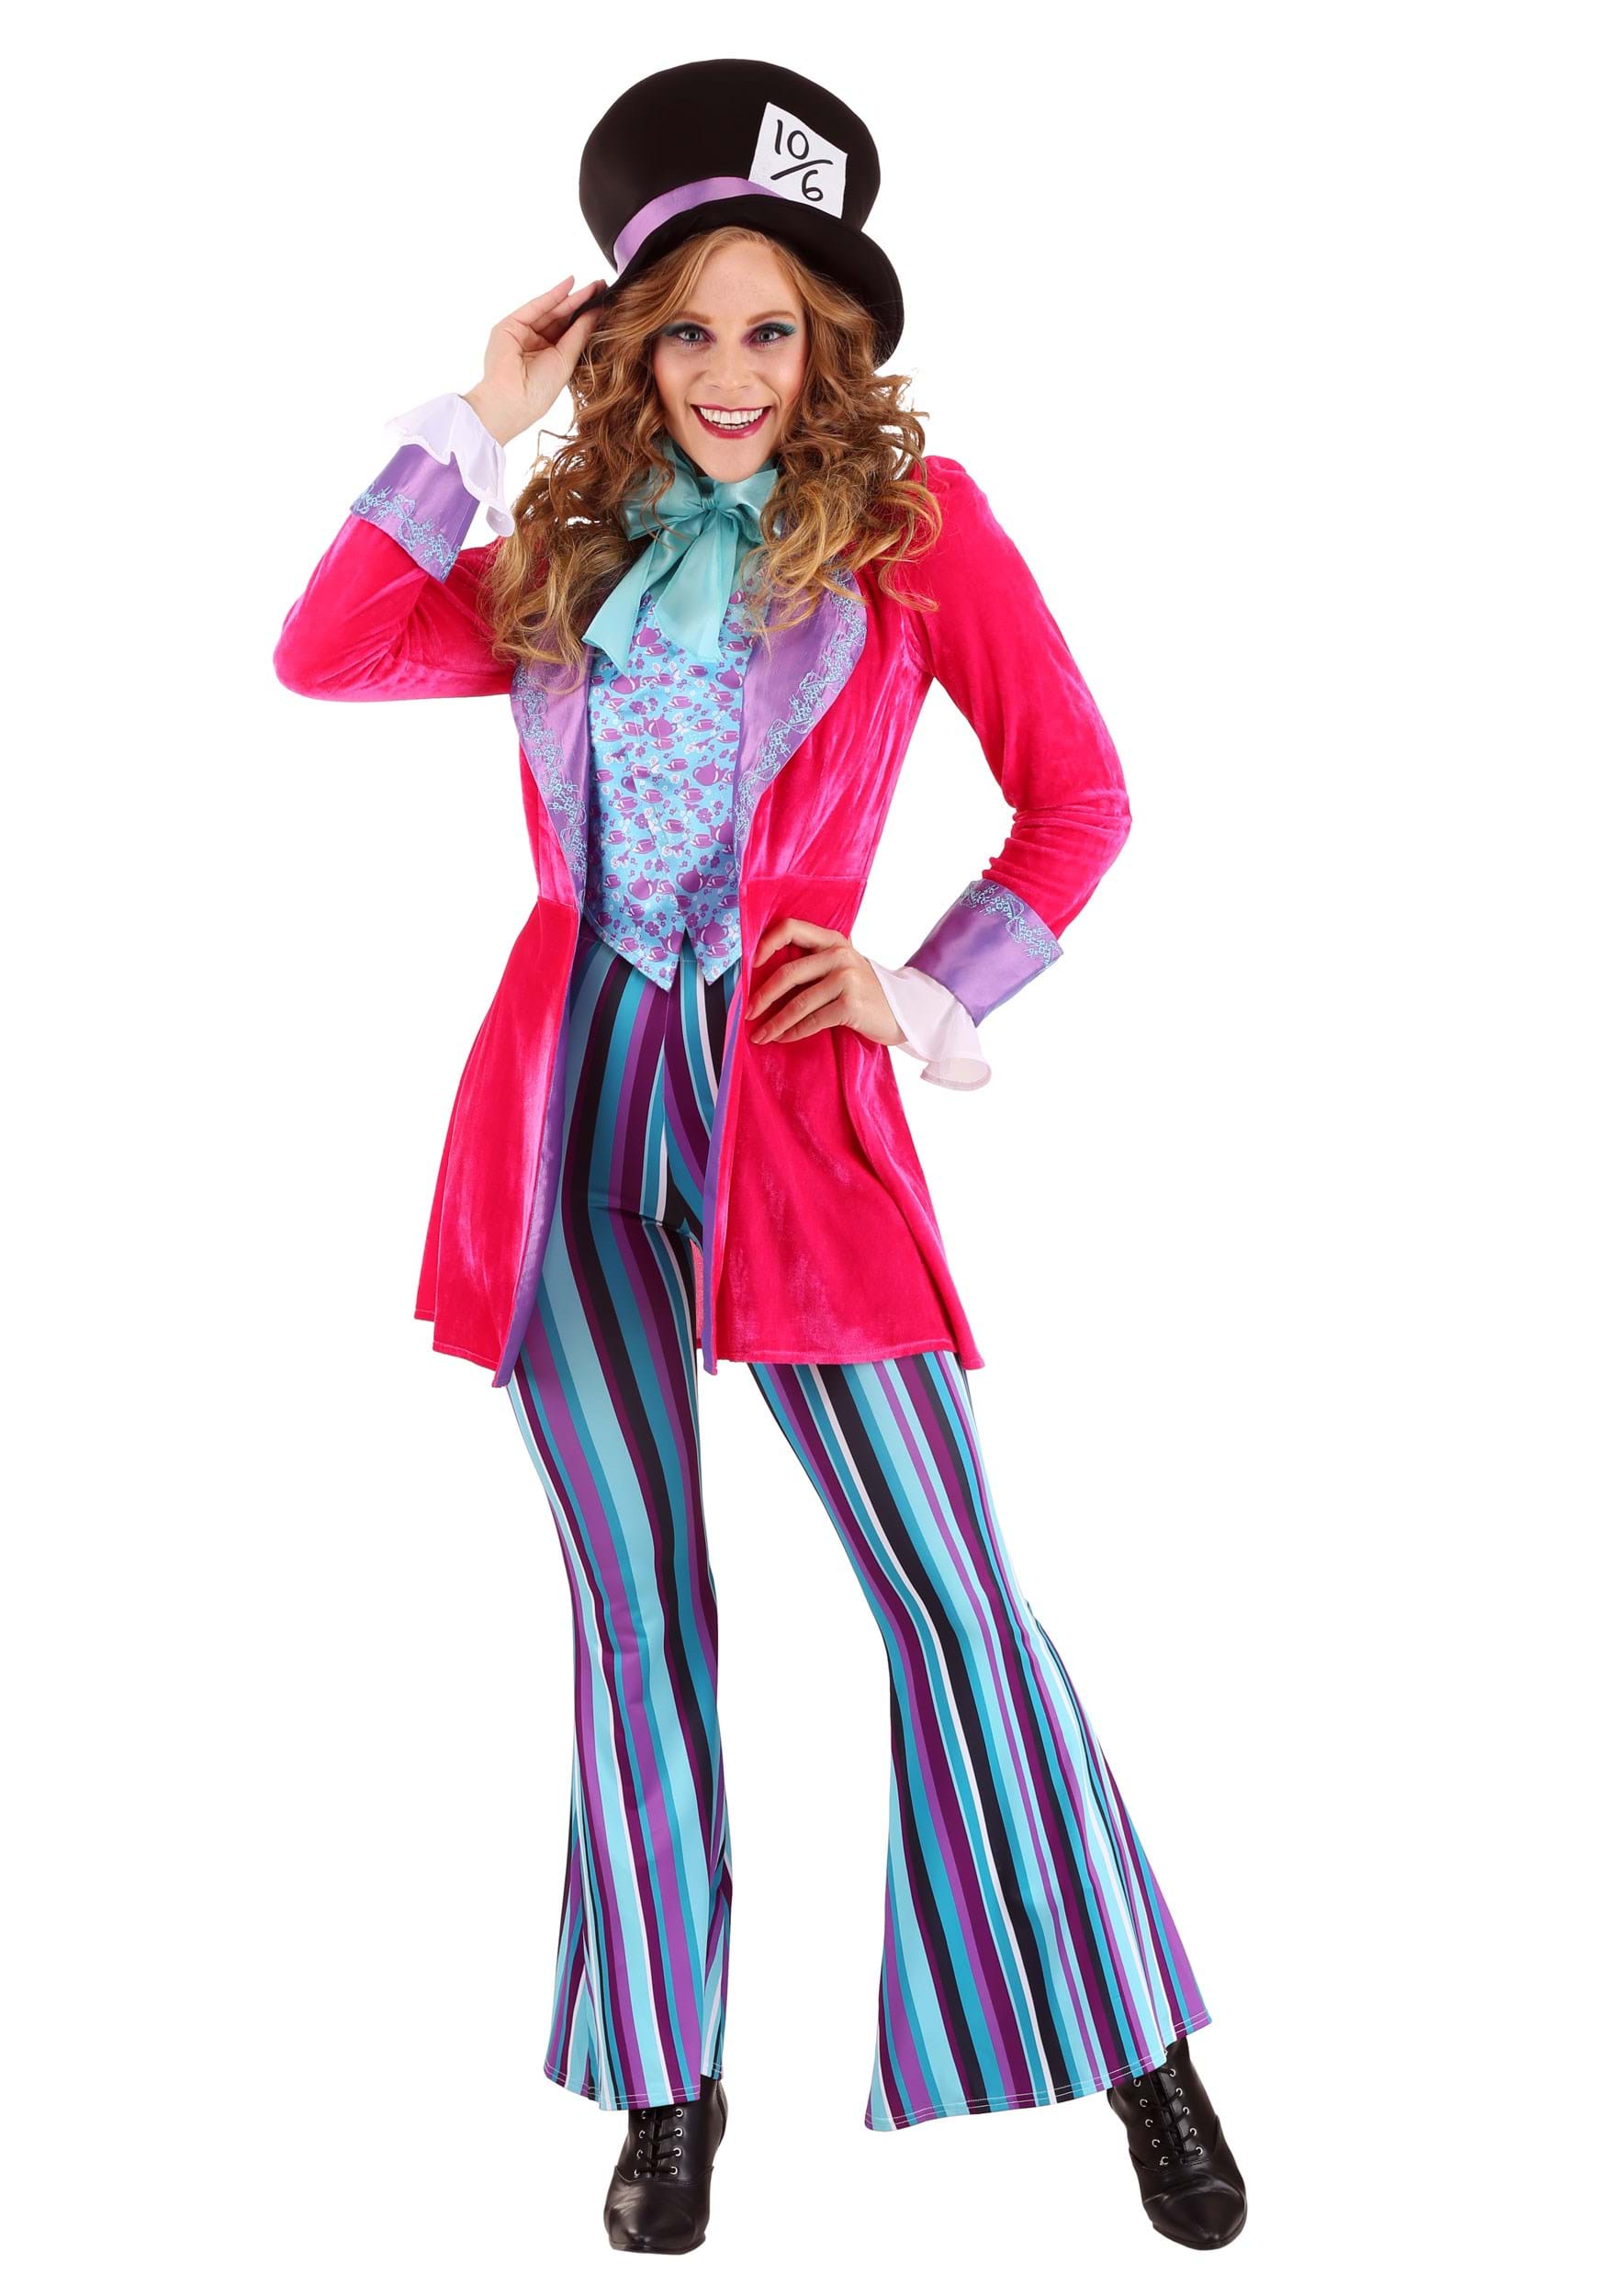 Photos - Fancy Dress Mad Hatter FUN Costumes Whimsical  Women's Costume |  Costumes Pi 